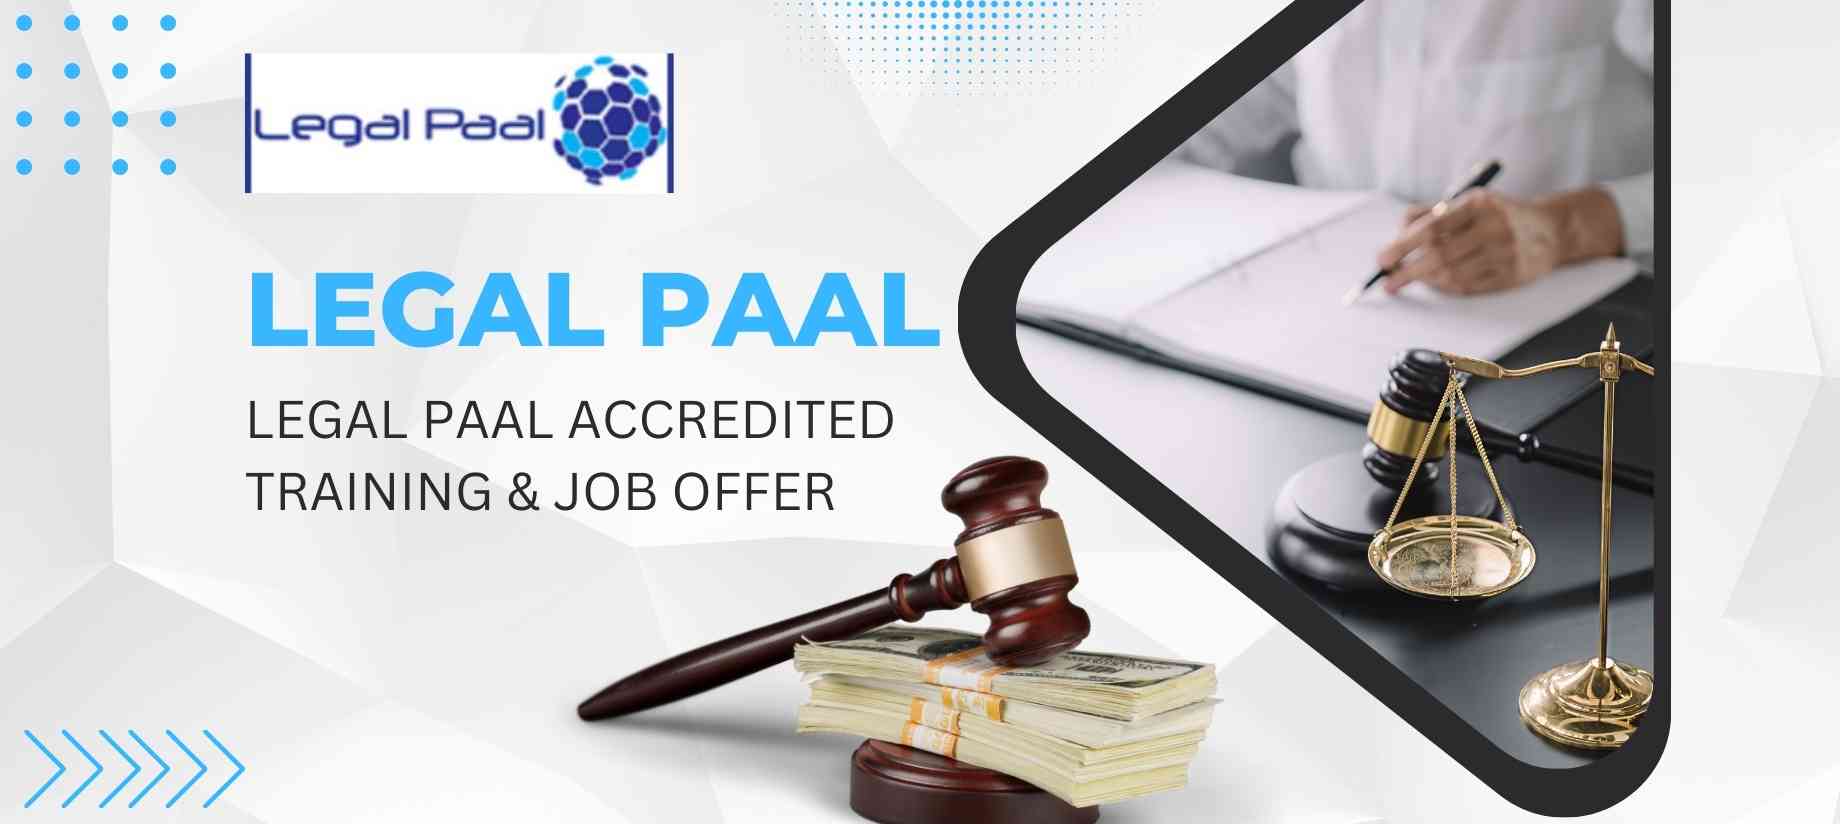 Legal Paal Jobs & Employment - Banner Image on Legal Paal